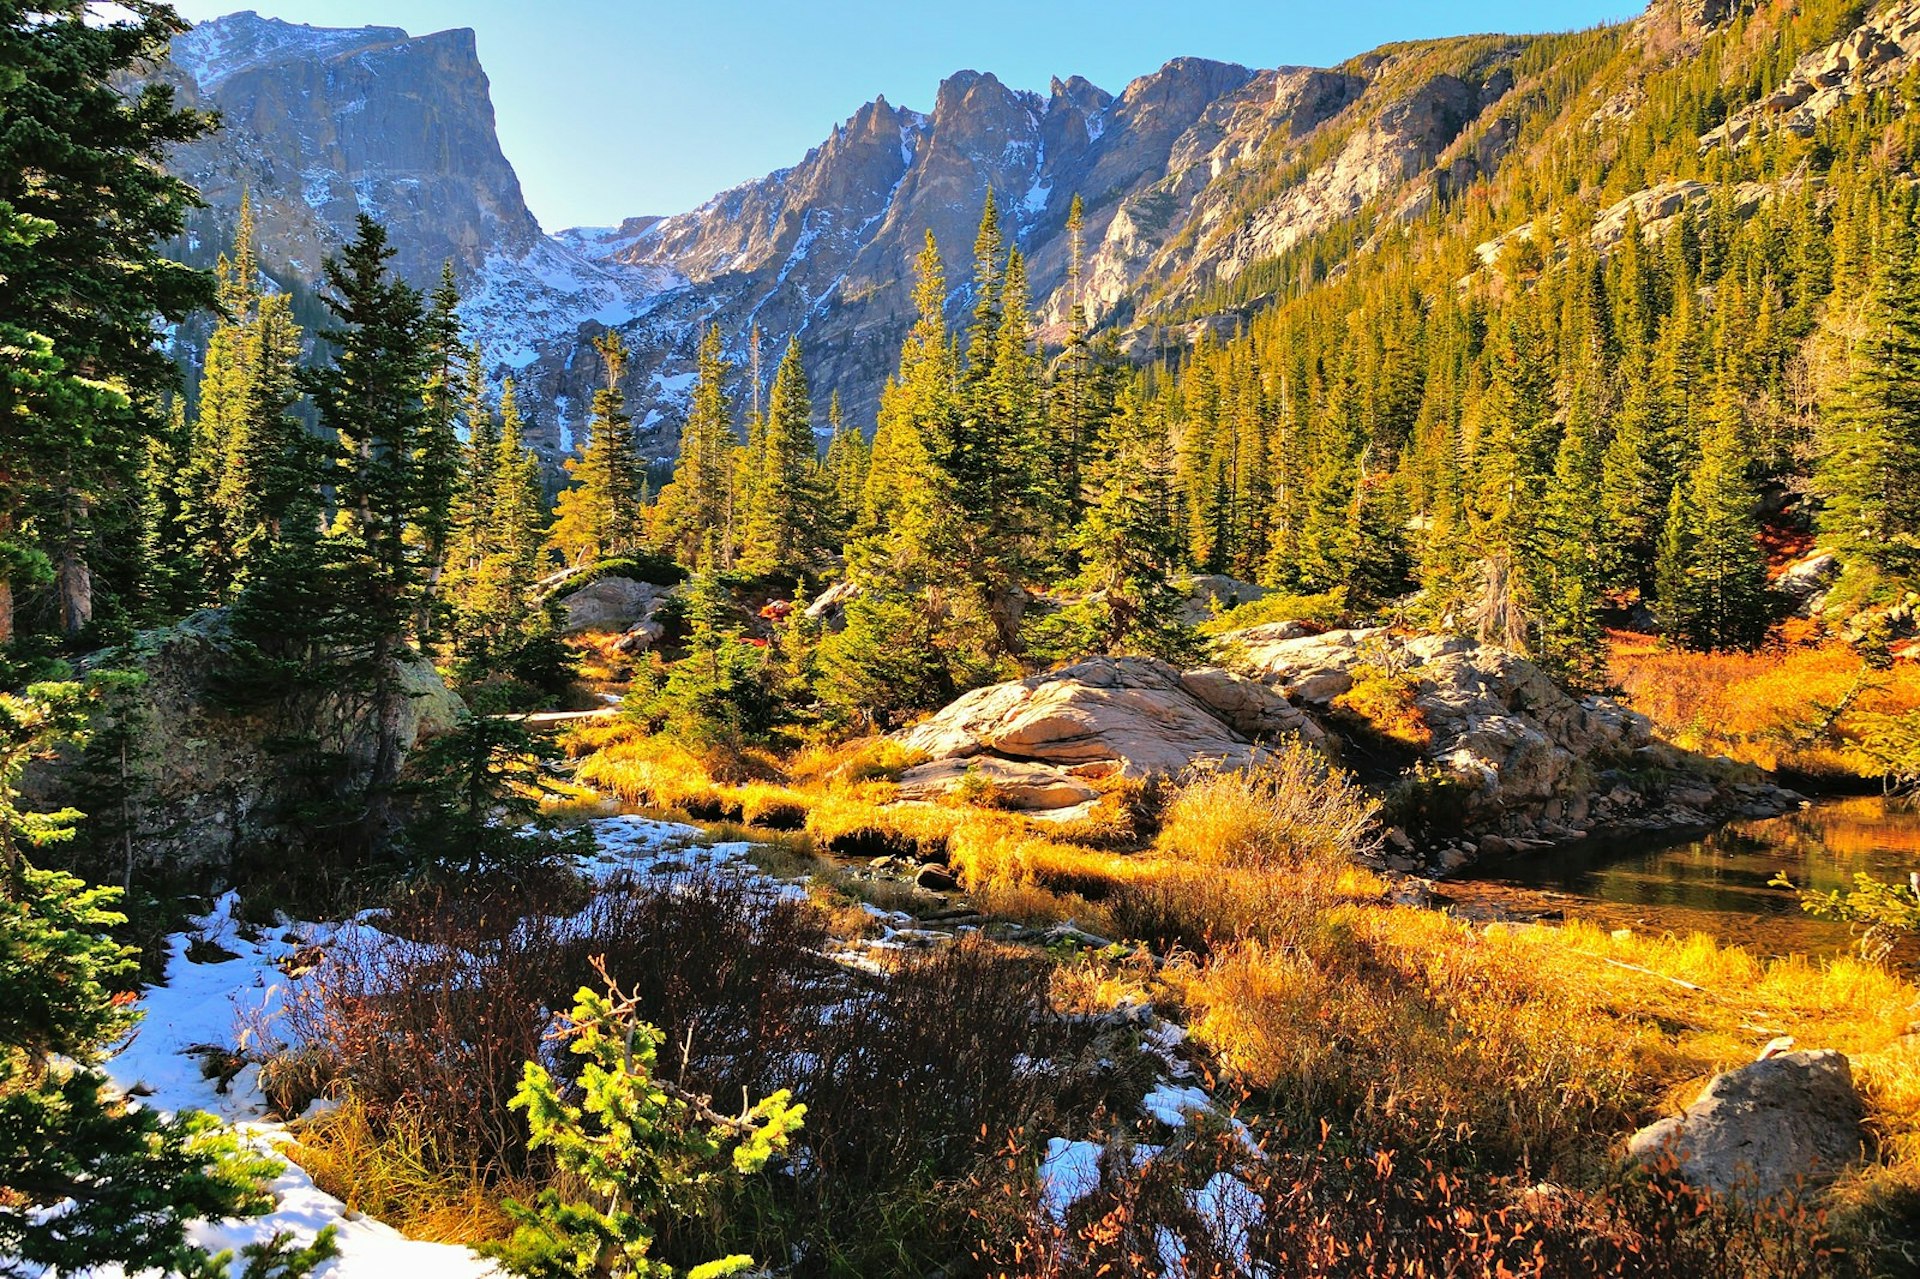 A colourful forest in the Rocky Mountains National Park in autumn with snow and mountains in the background